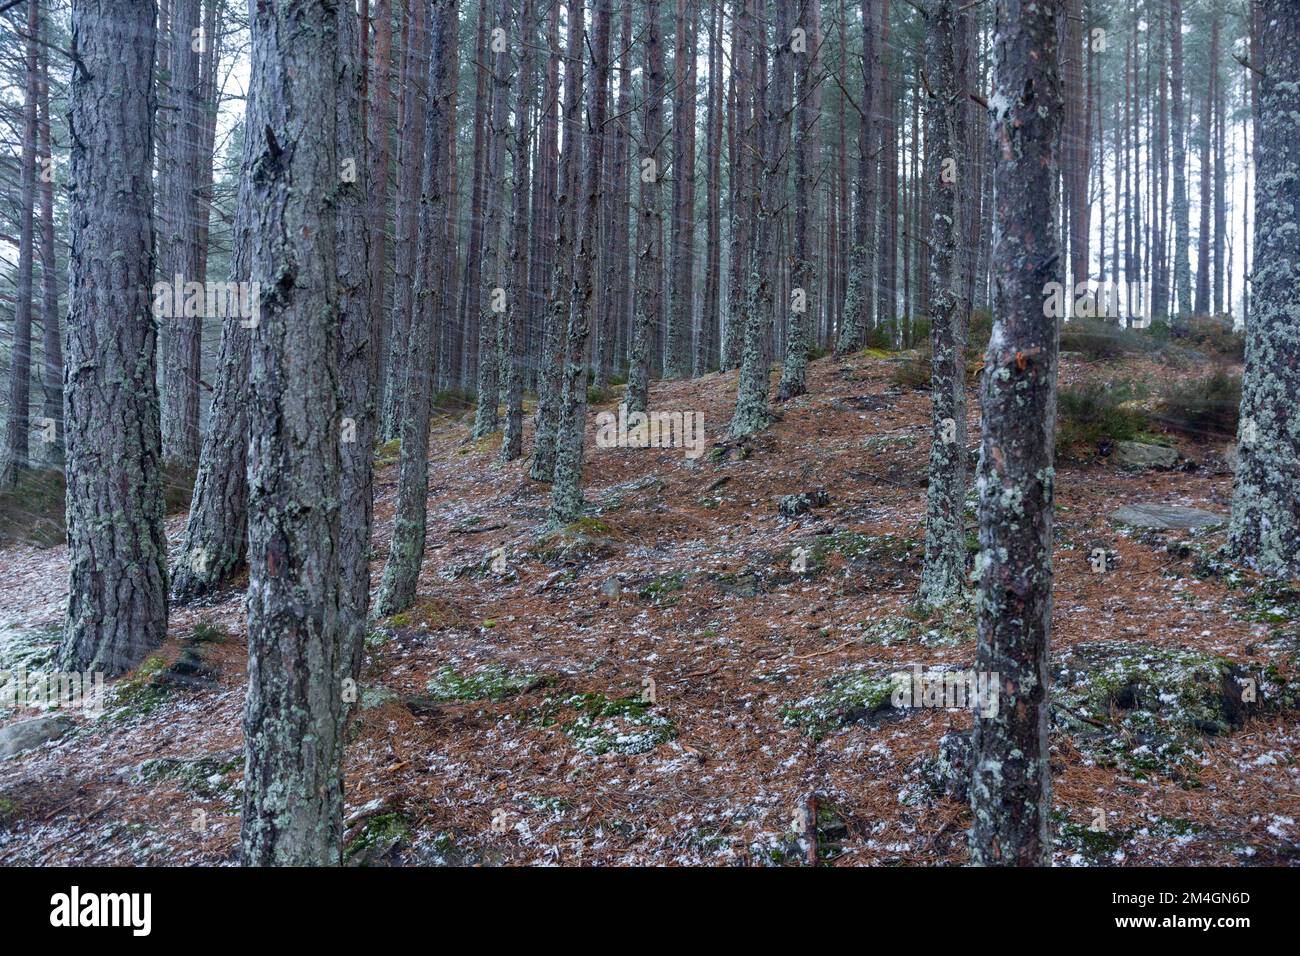 Landscape view of pine forest in winter, Uath Lochan, Glenfeshie, Highlands, Scotland, UK, February Stock Photo